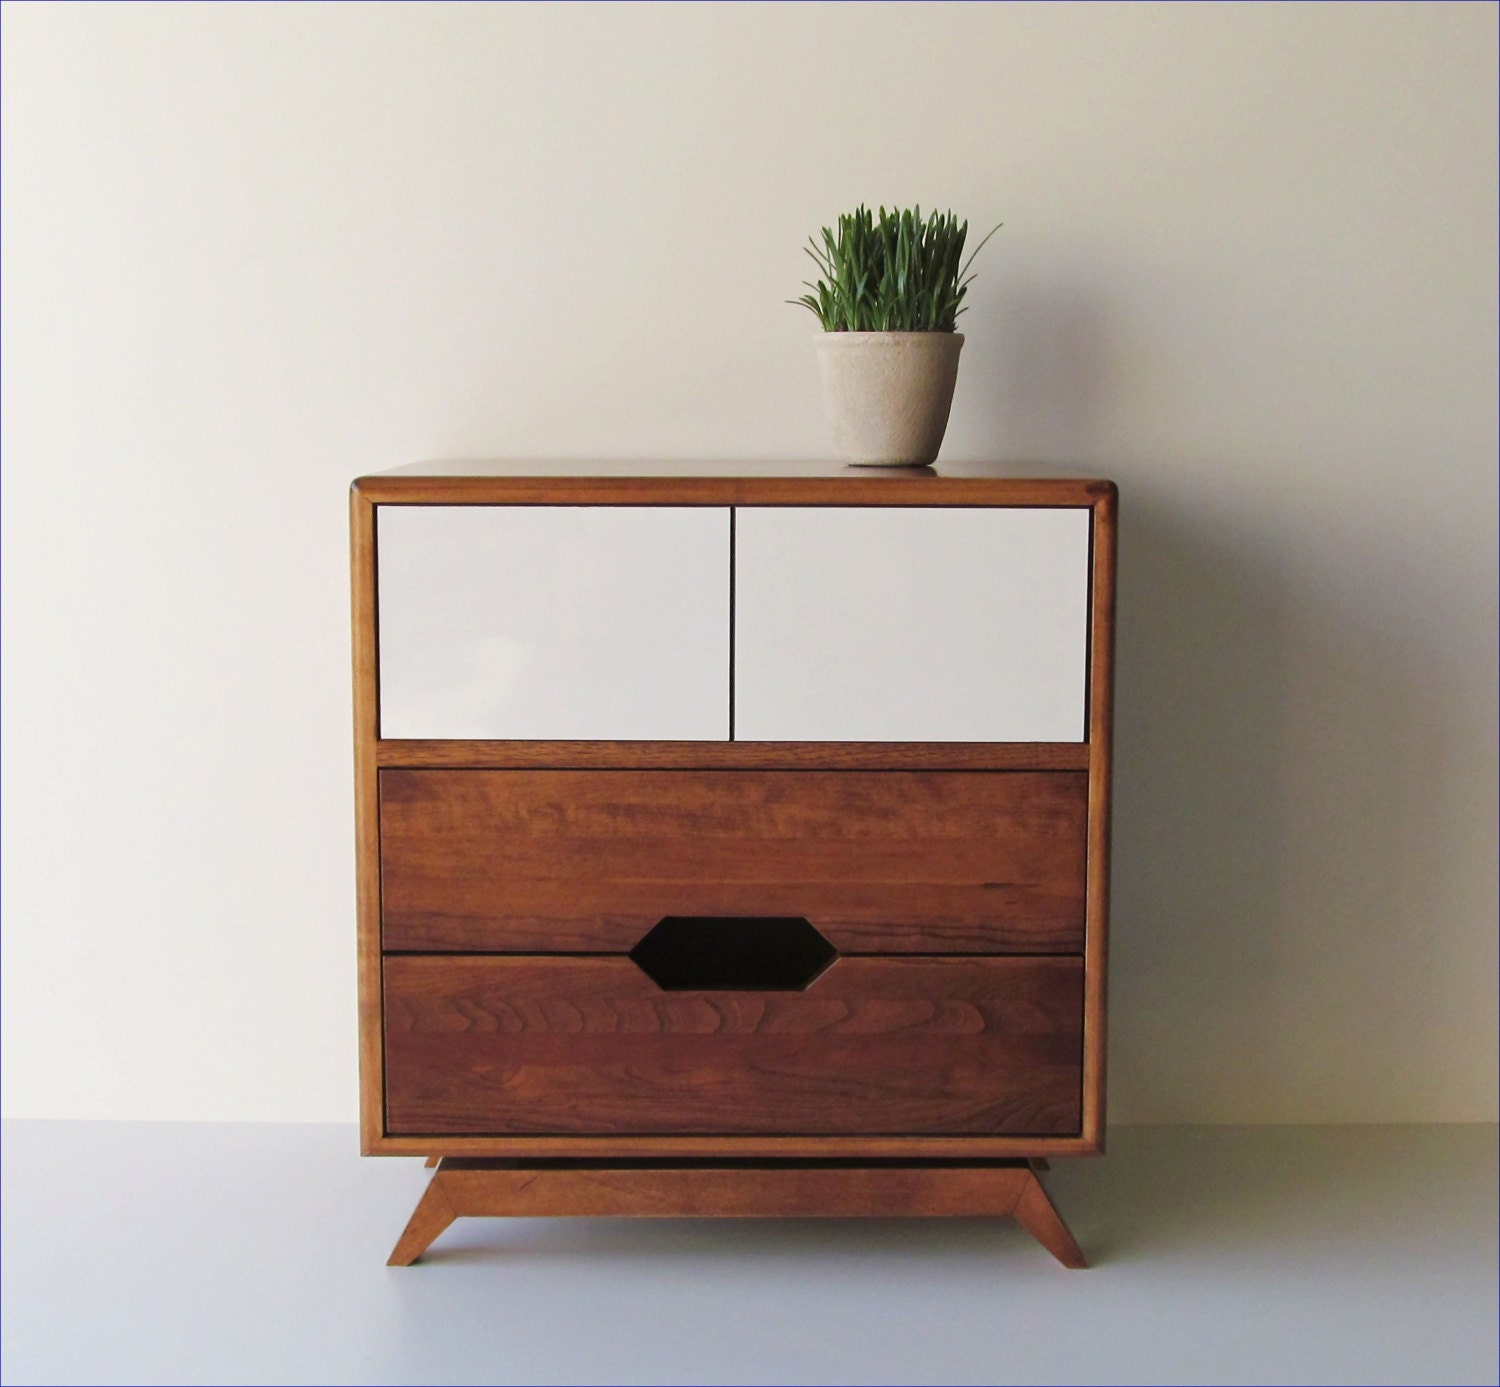 Mid-Century Style Bedside Table Made From Reclaimed Wood With Hidden Compartment and Push-To-Open Doors - TheOffWhiteDog